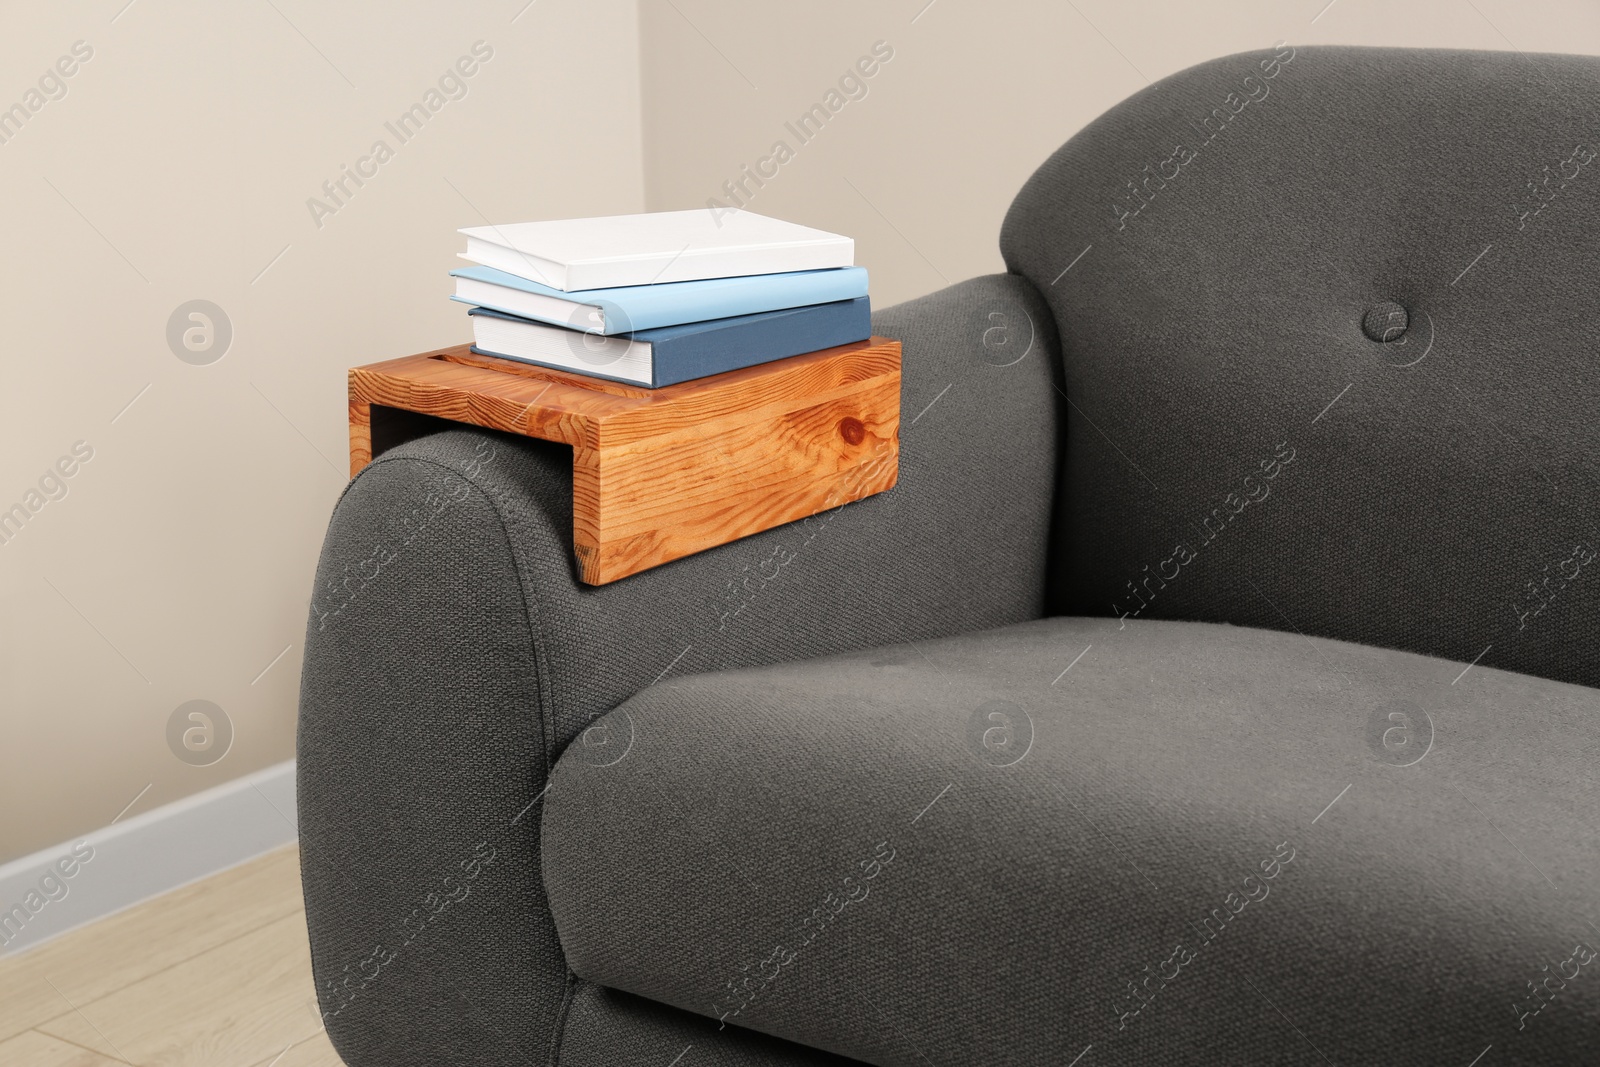 Photo of Books on sofa with wooden armrest table in room. Interior element